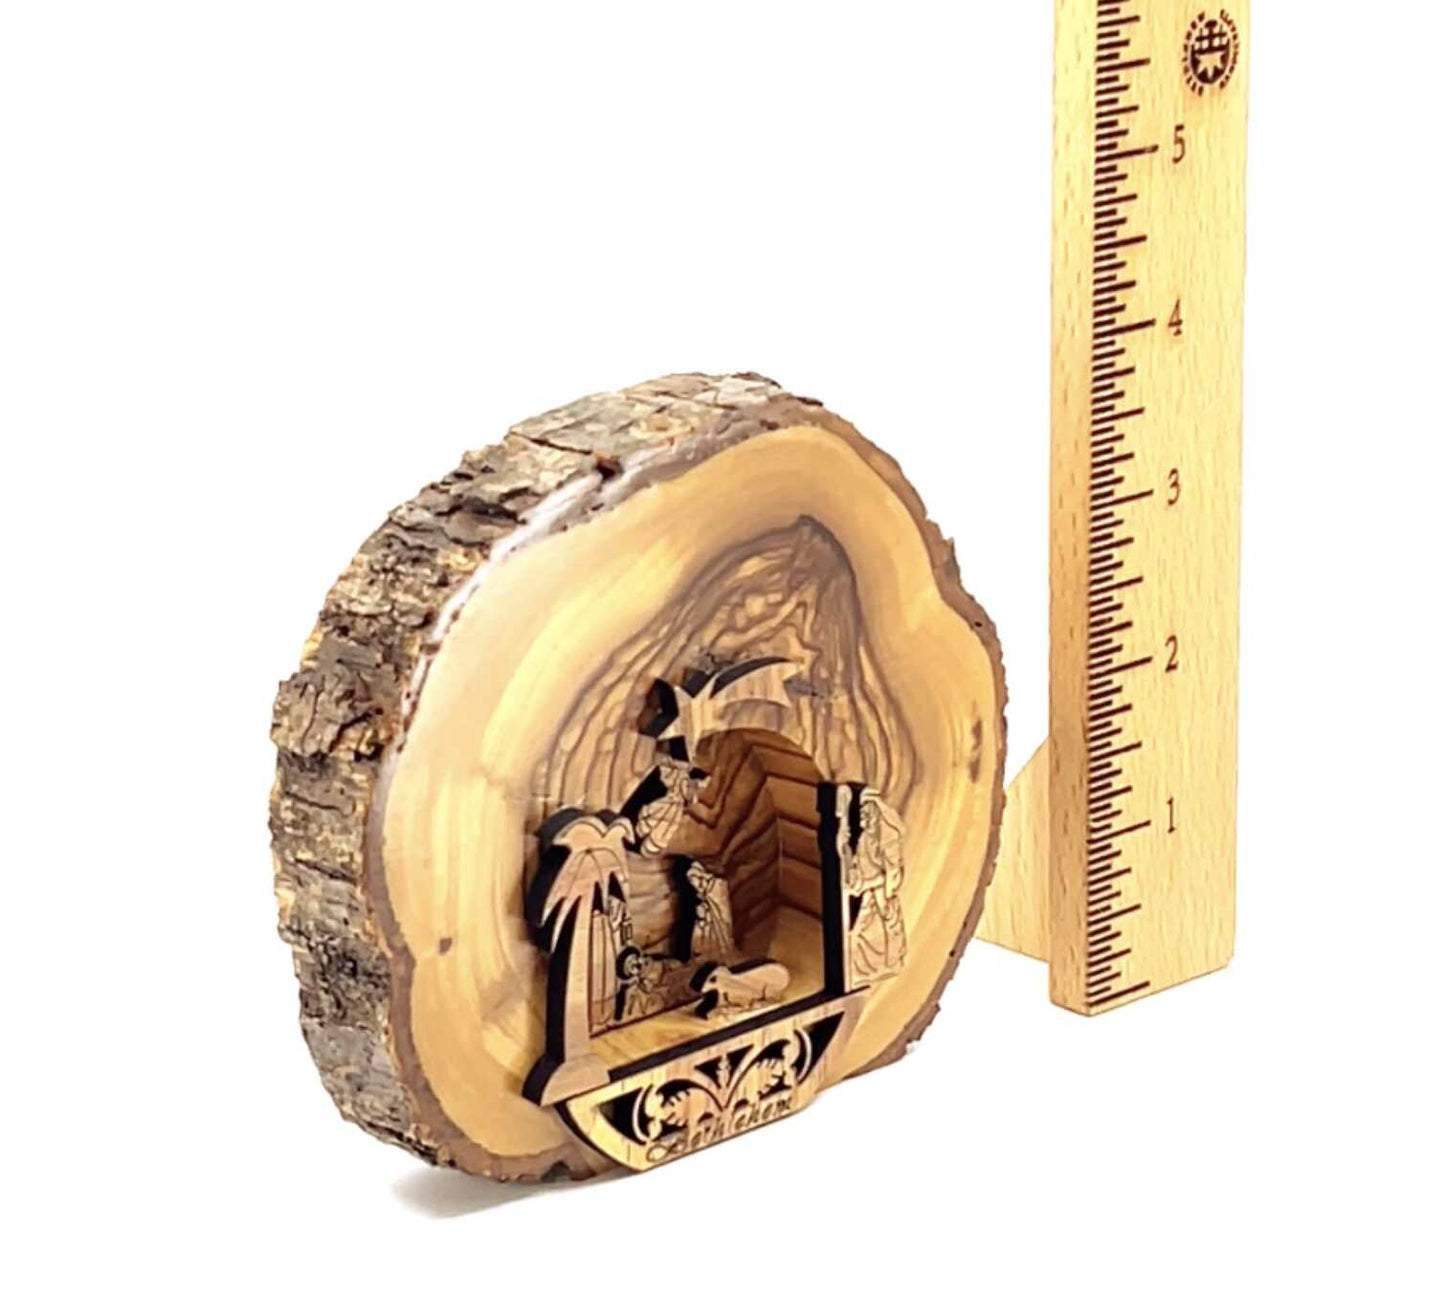 Nativity Scene with Natural Bark, Smooth and Polished, 4" Olive Wood from Bethlehem